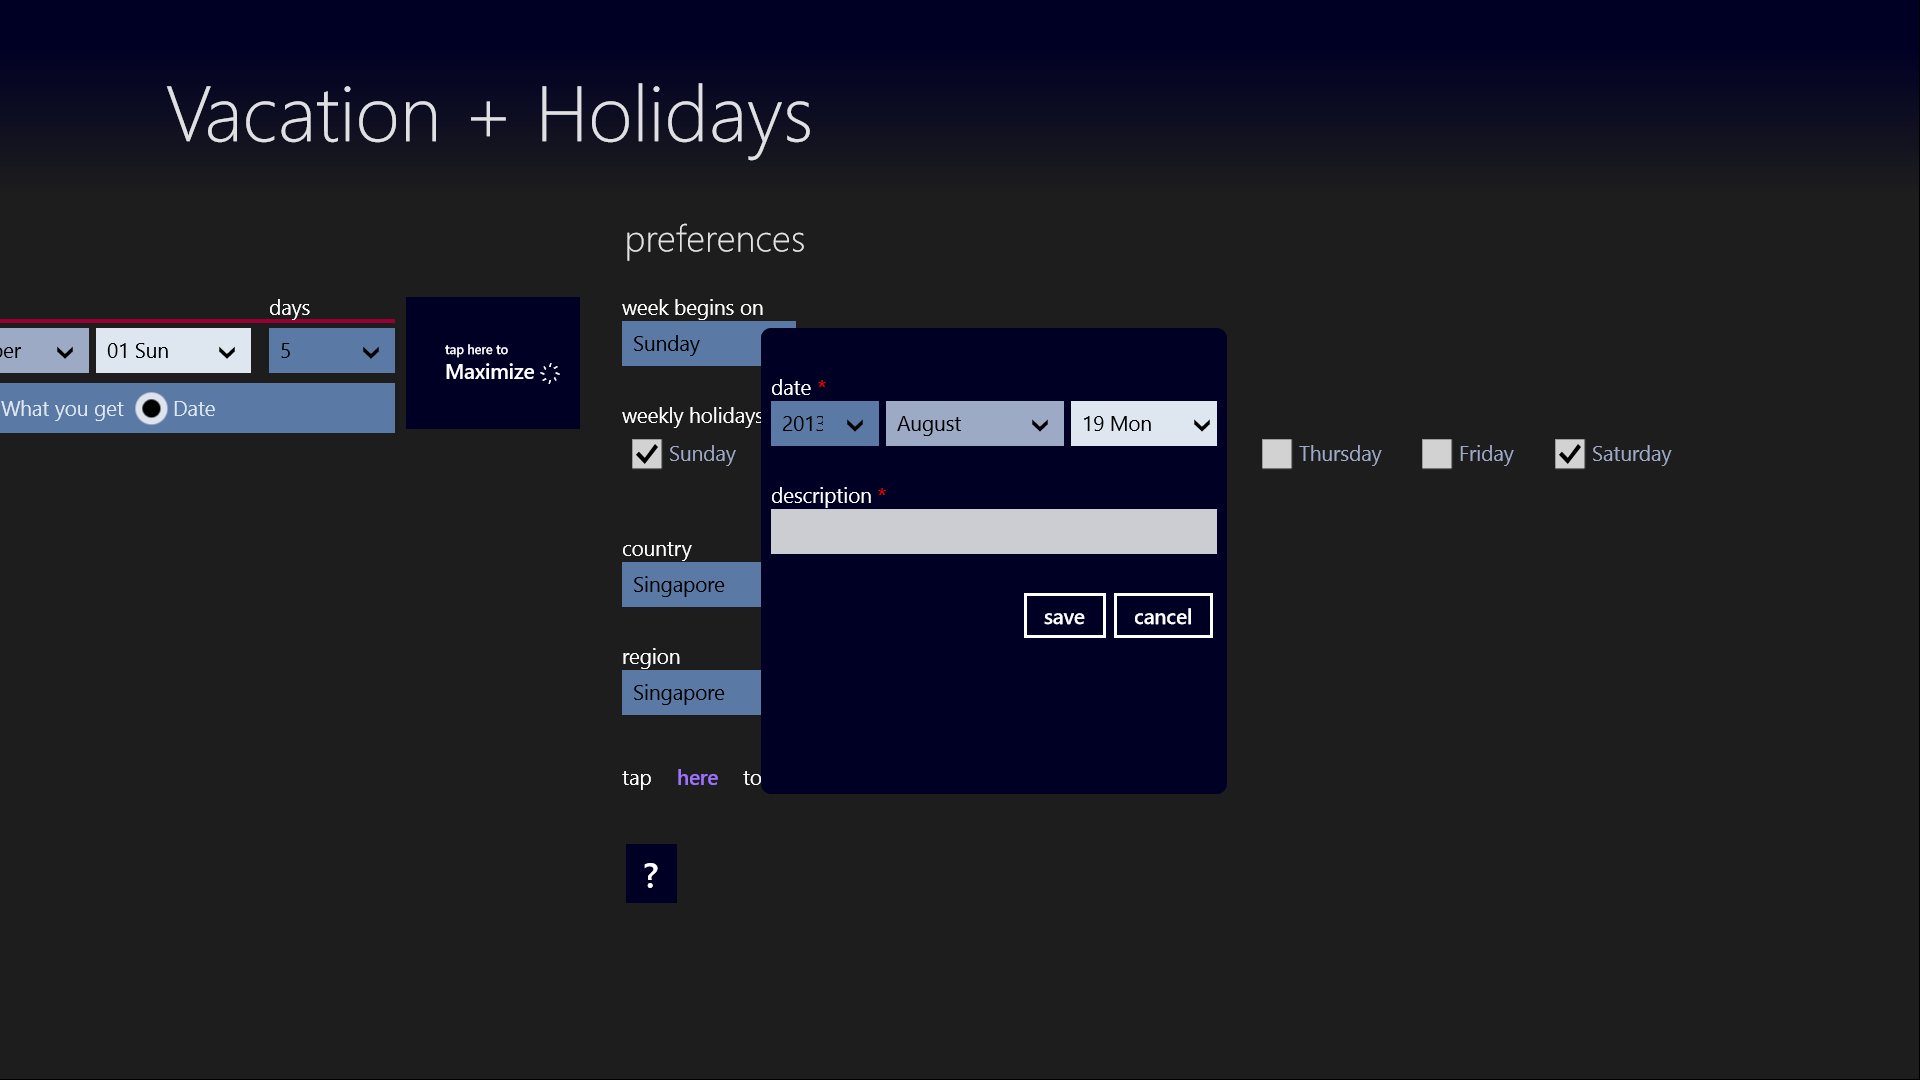 Customize!!!  If need, you can even add new holidays relevant to your region.